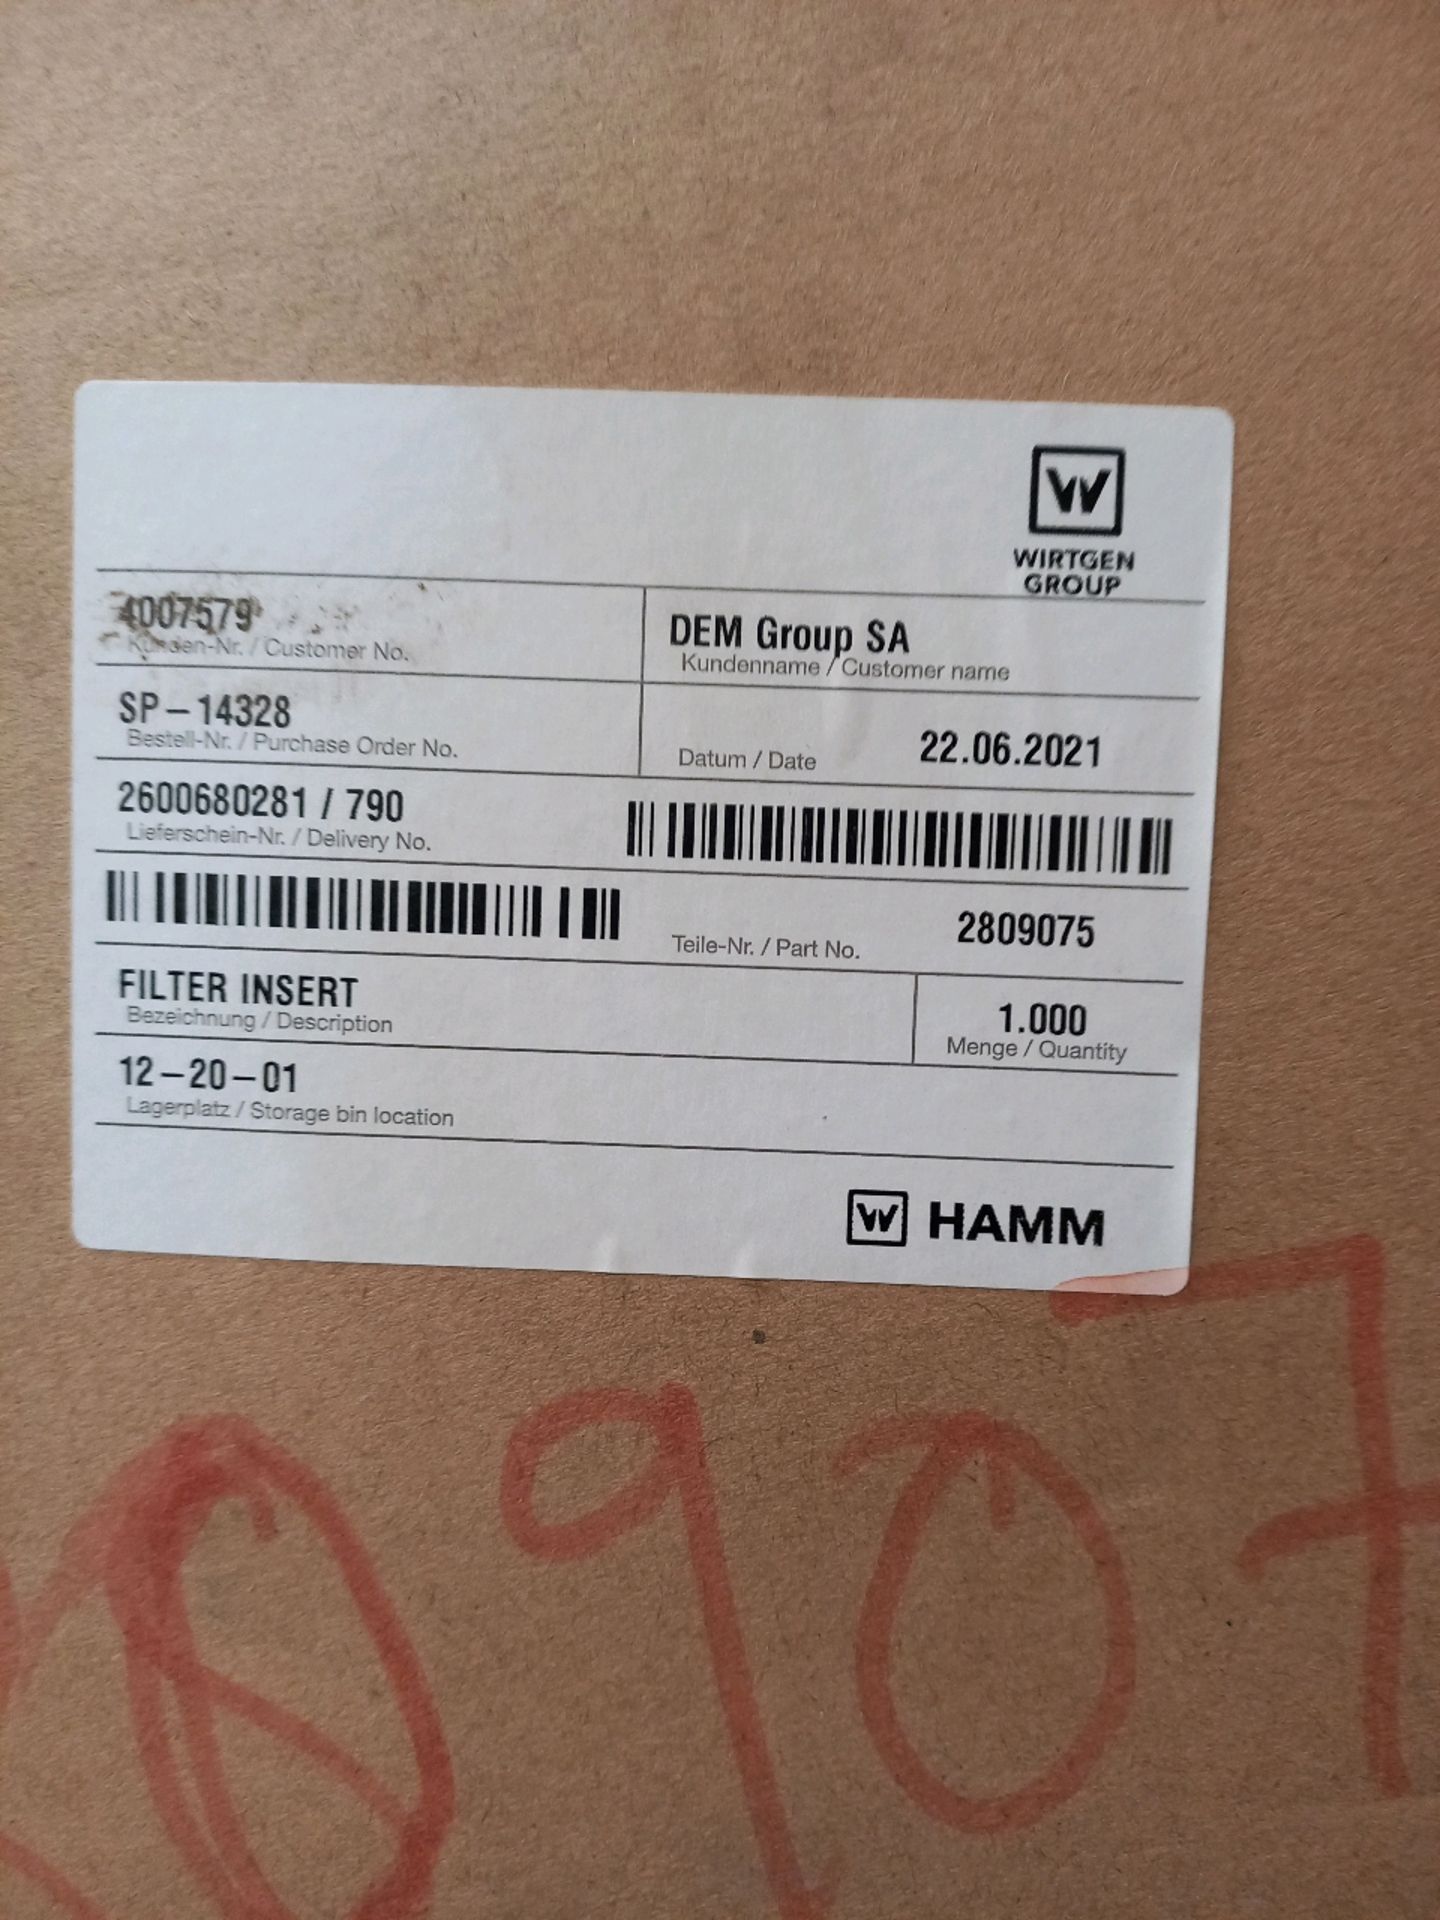 HAMM Spares - Image 19 of 98